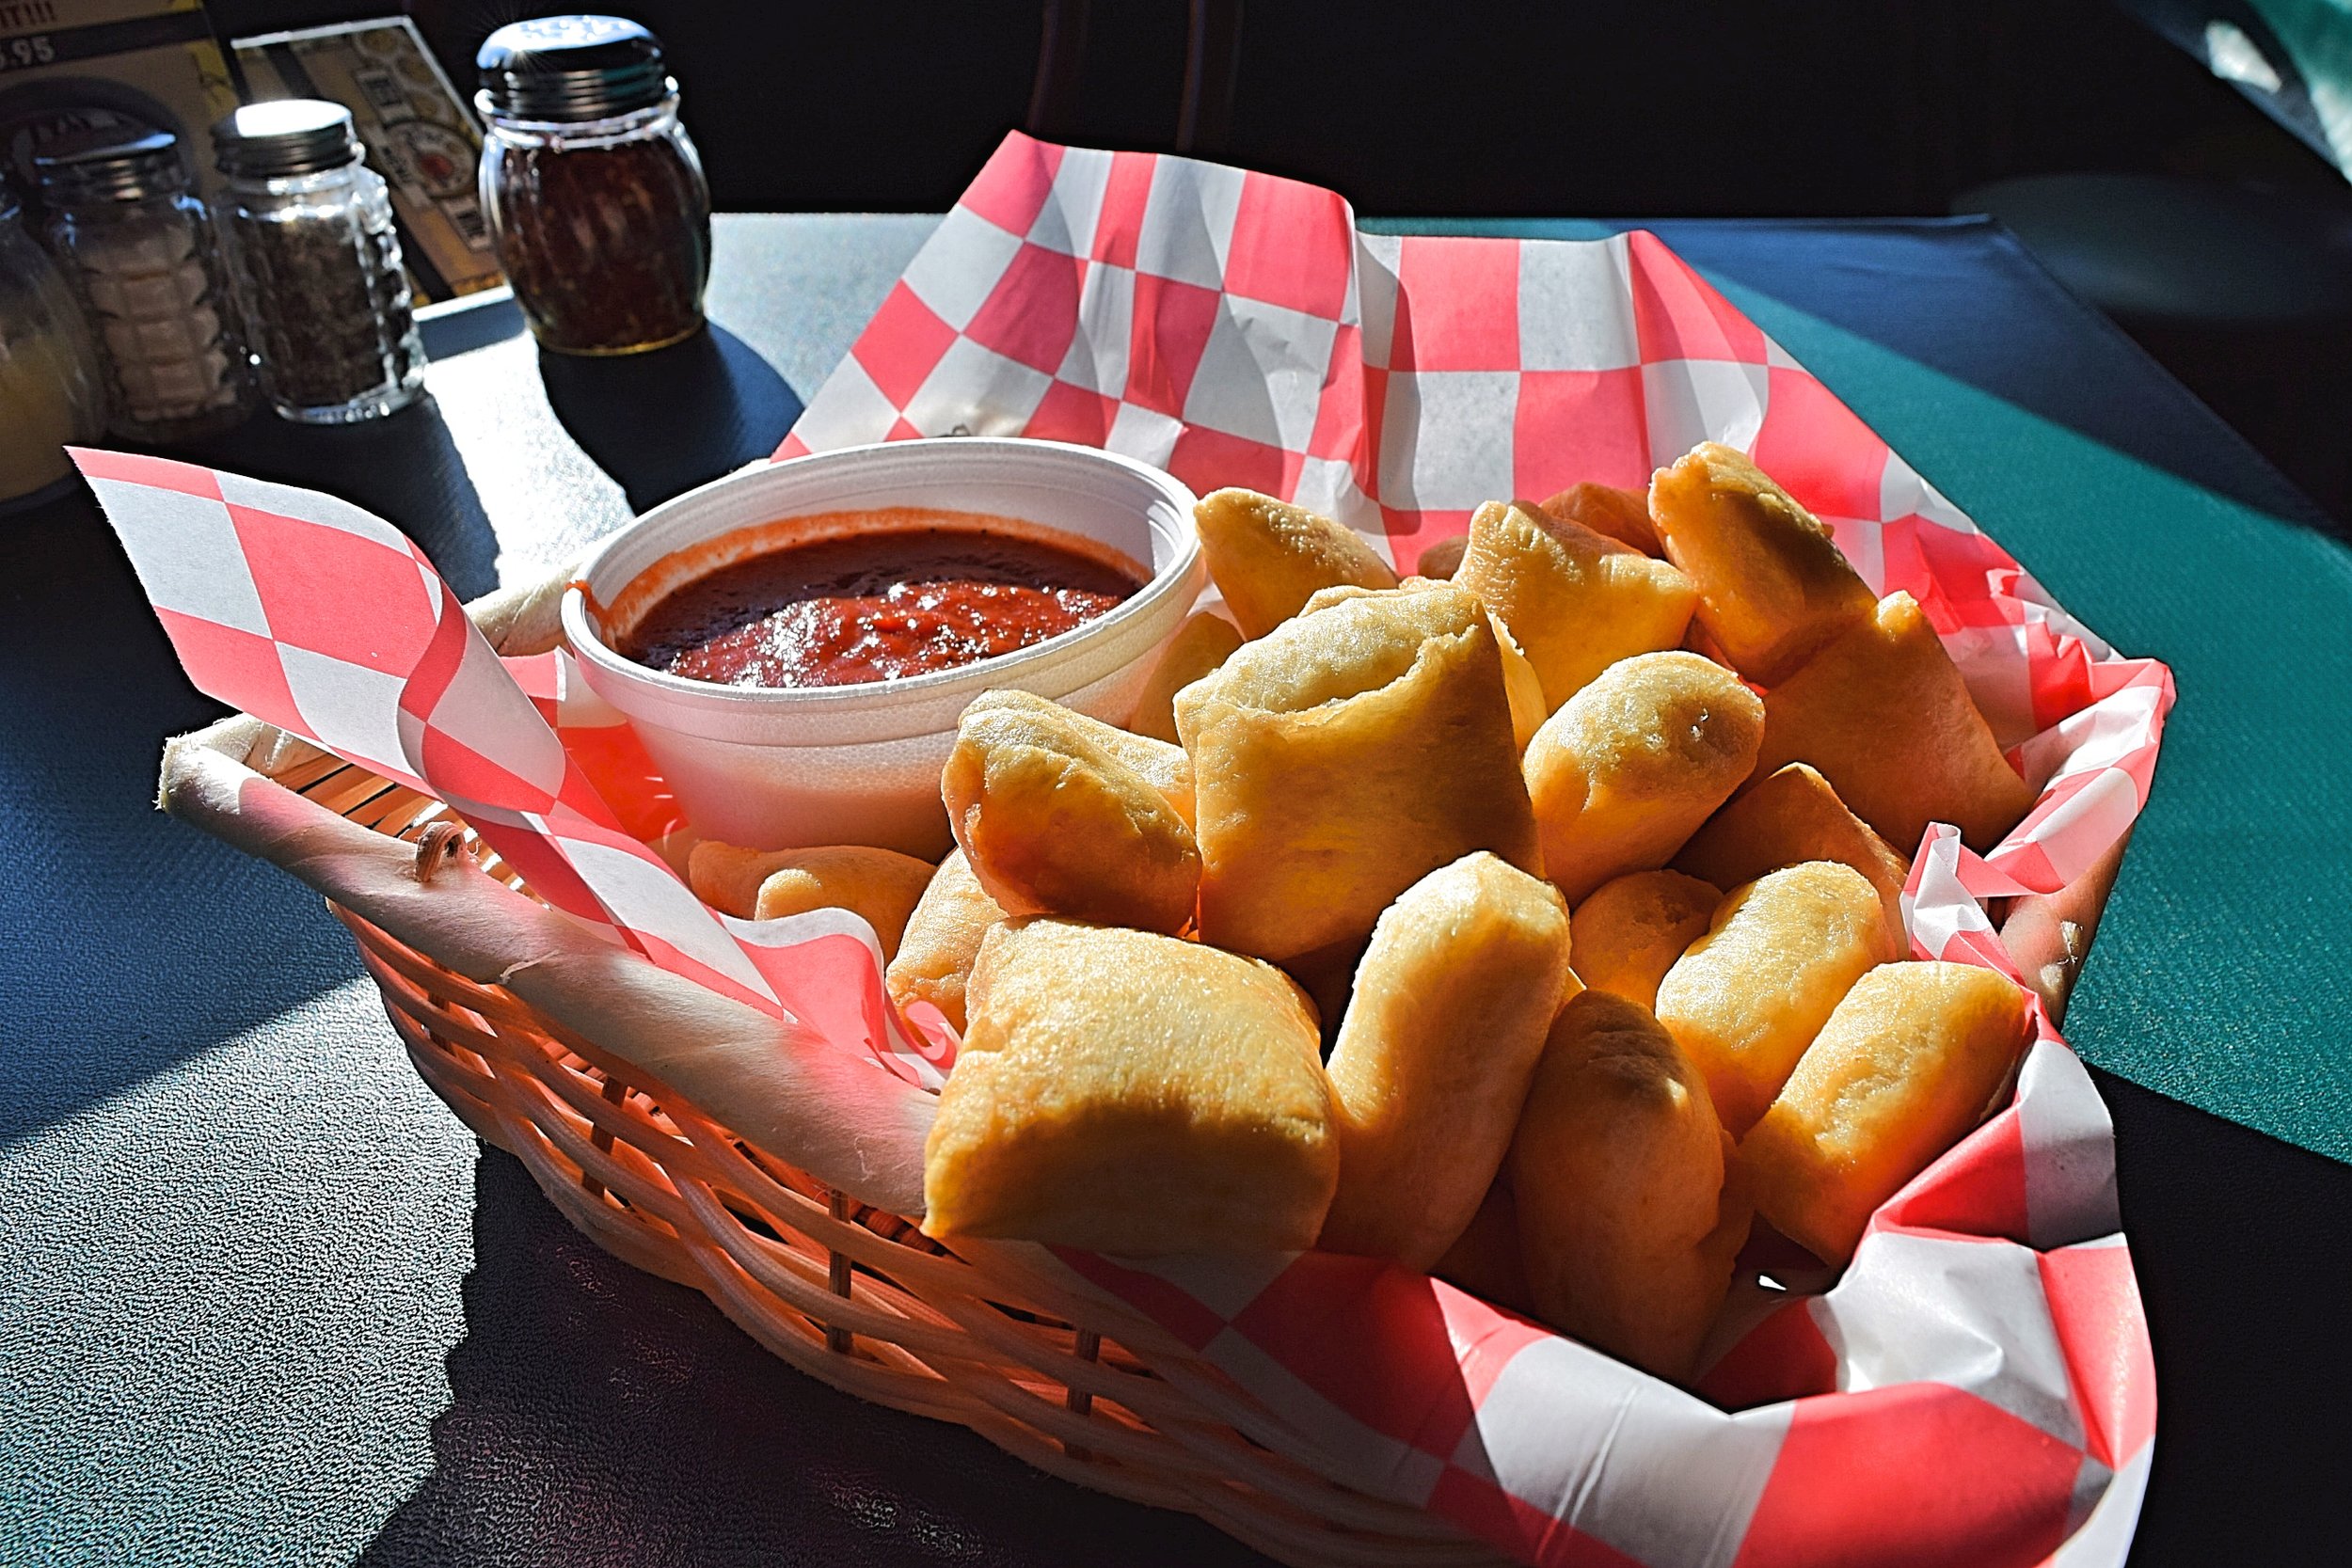 Beer nuggets are more than just pizza butts, they're my everything